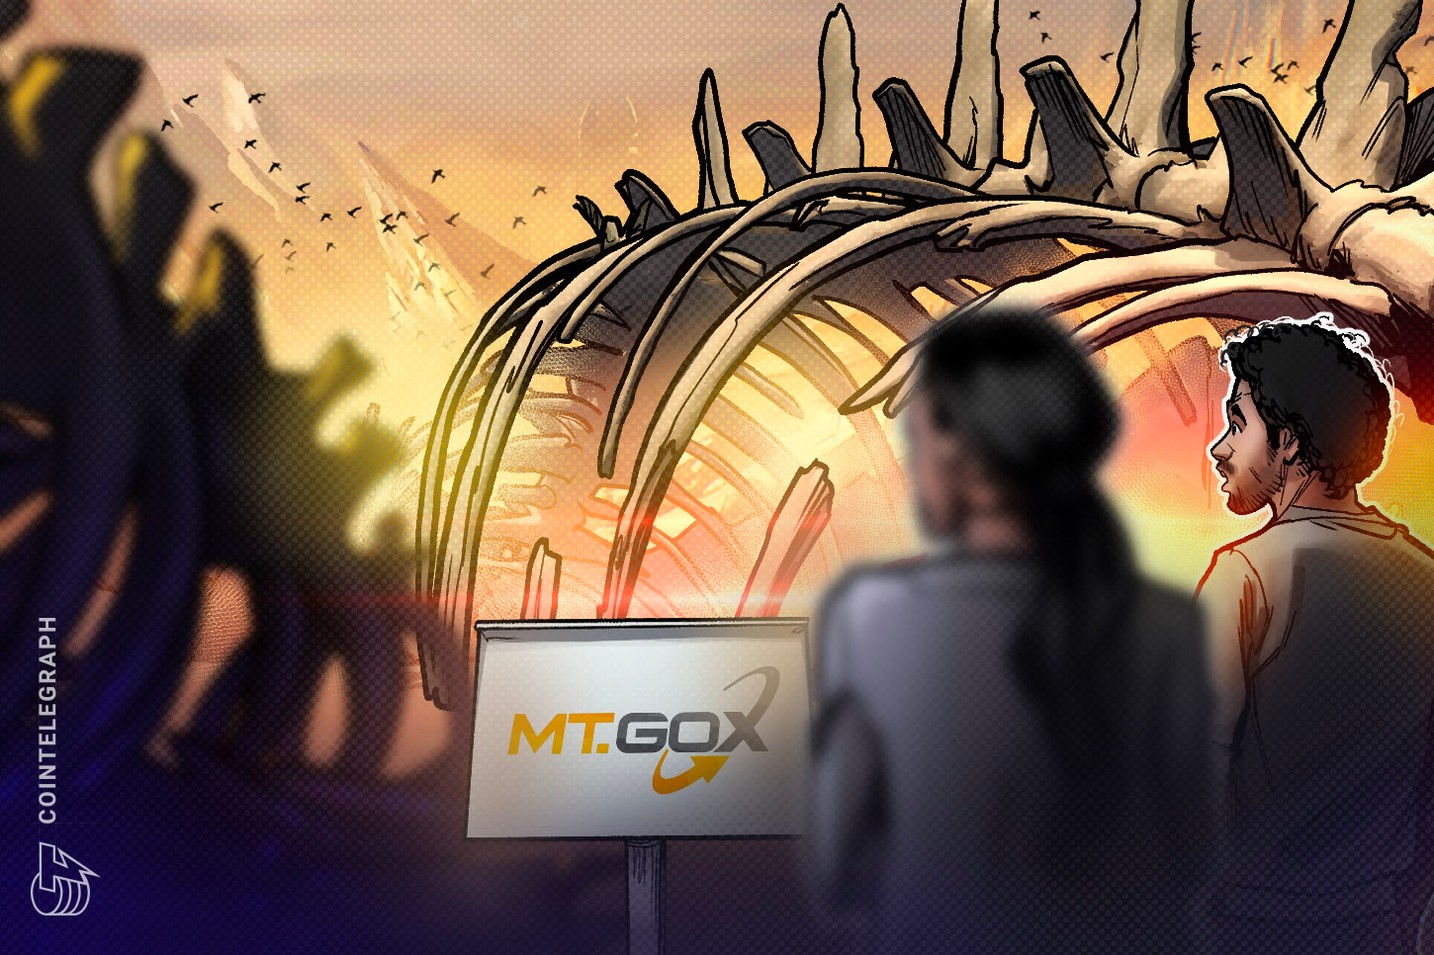 Mt. Gox creditor saga: What lessons has the Bitcoin community learned?